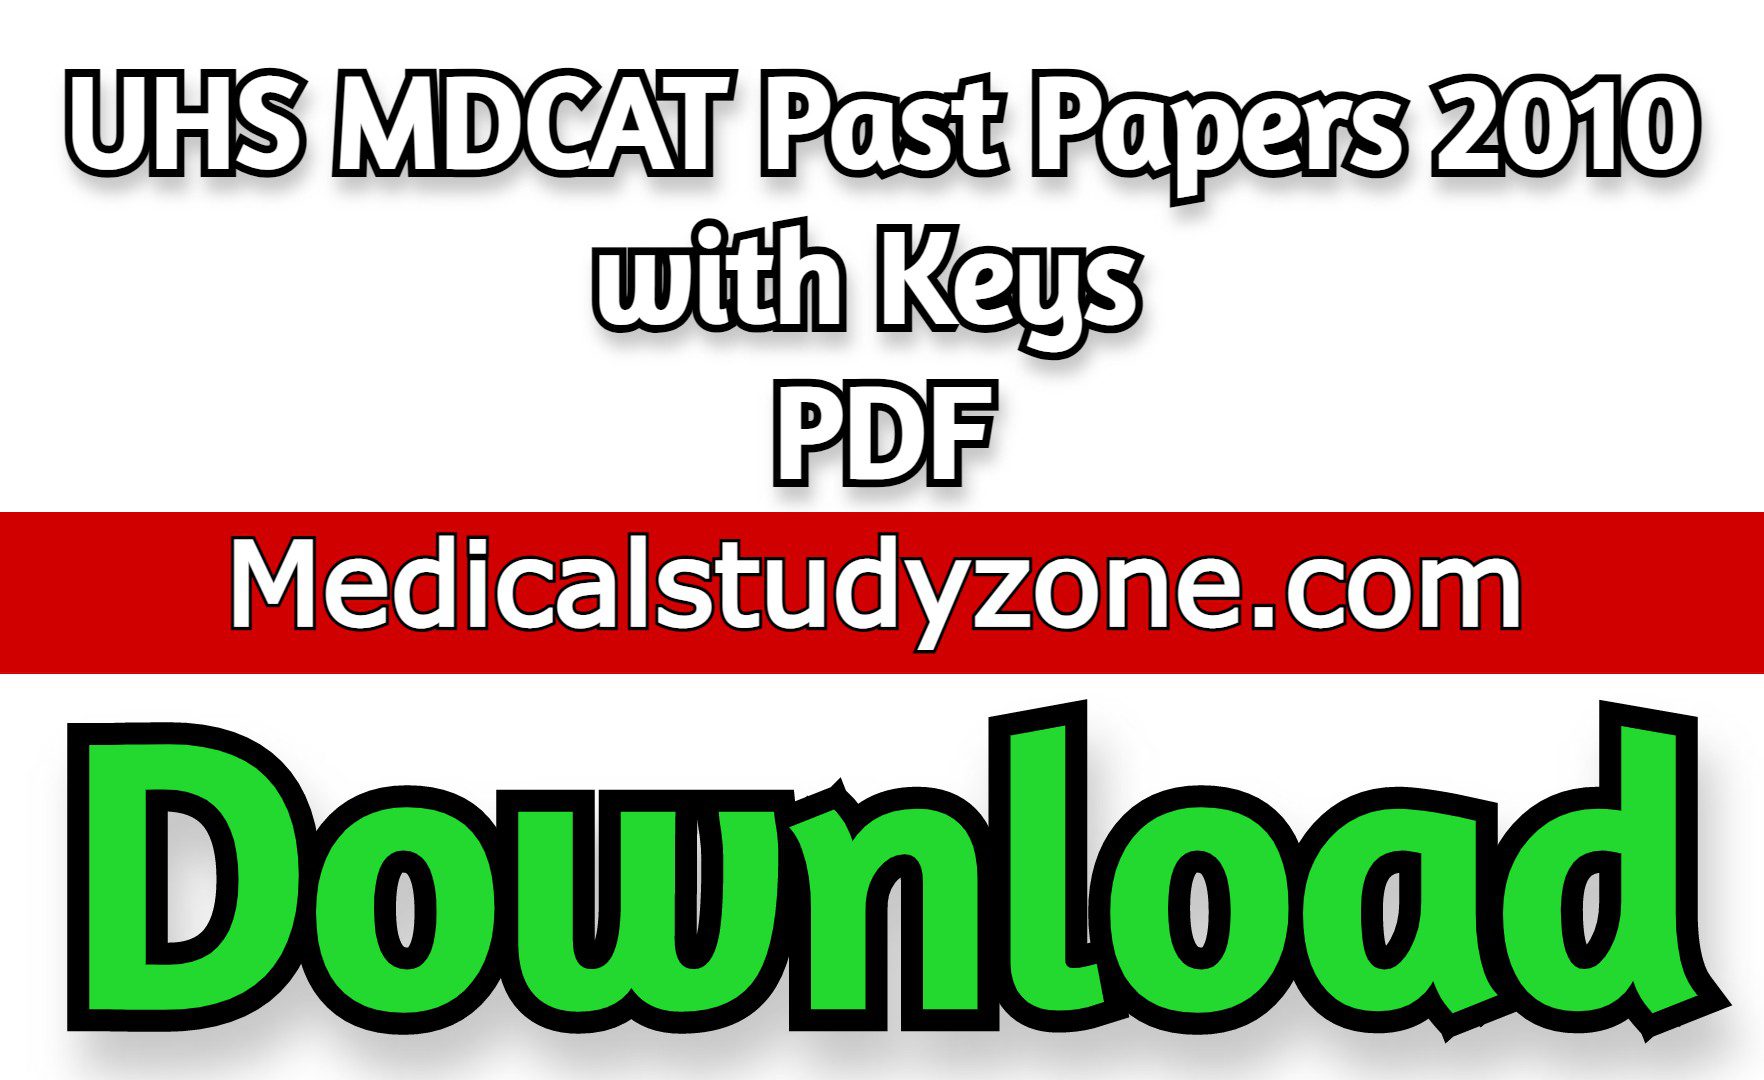 UHS MDCAT Past Papers 2010 with Keys PDF Free Download